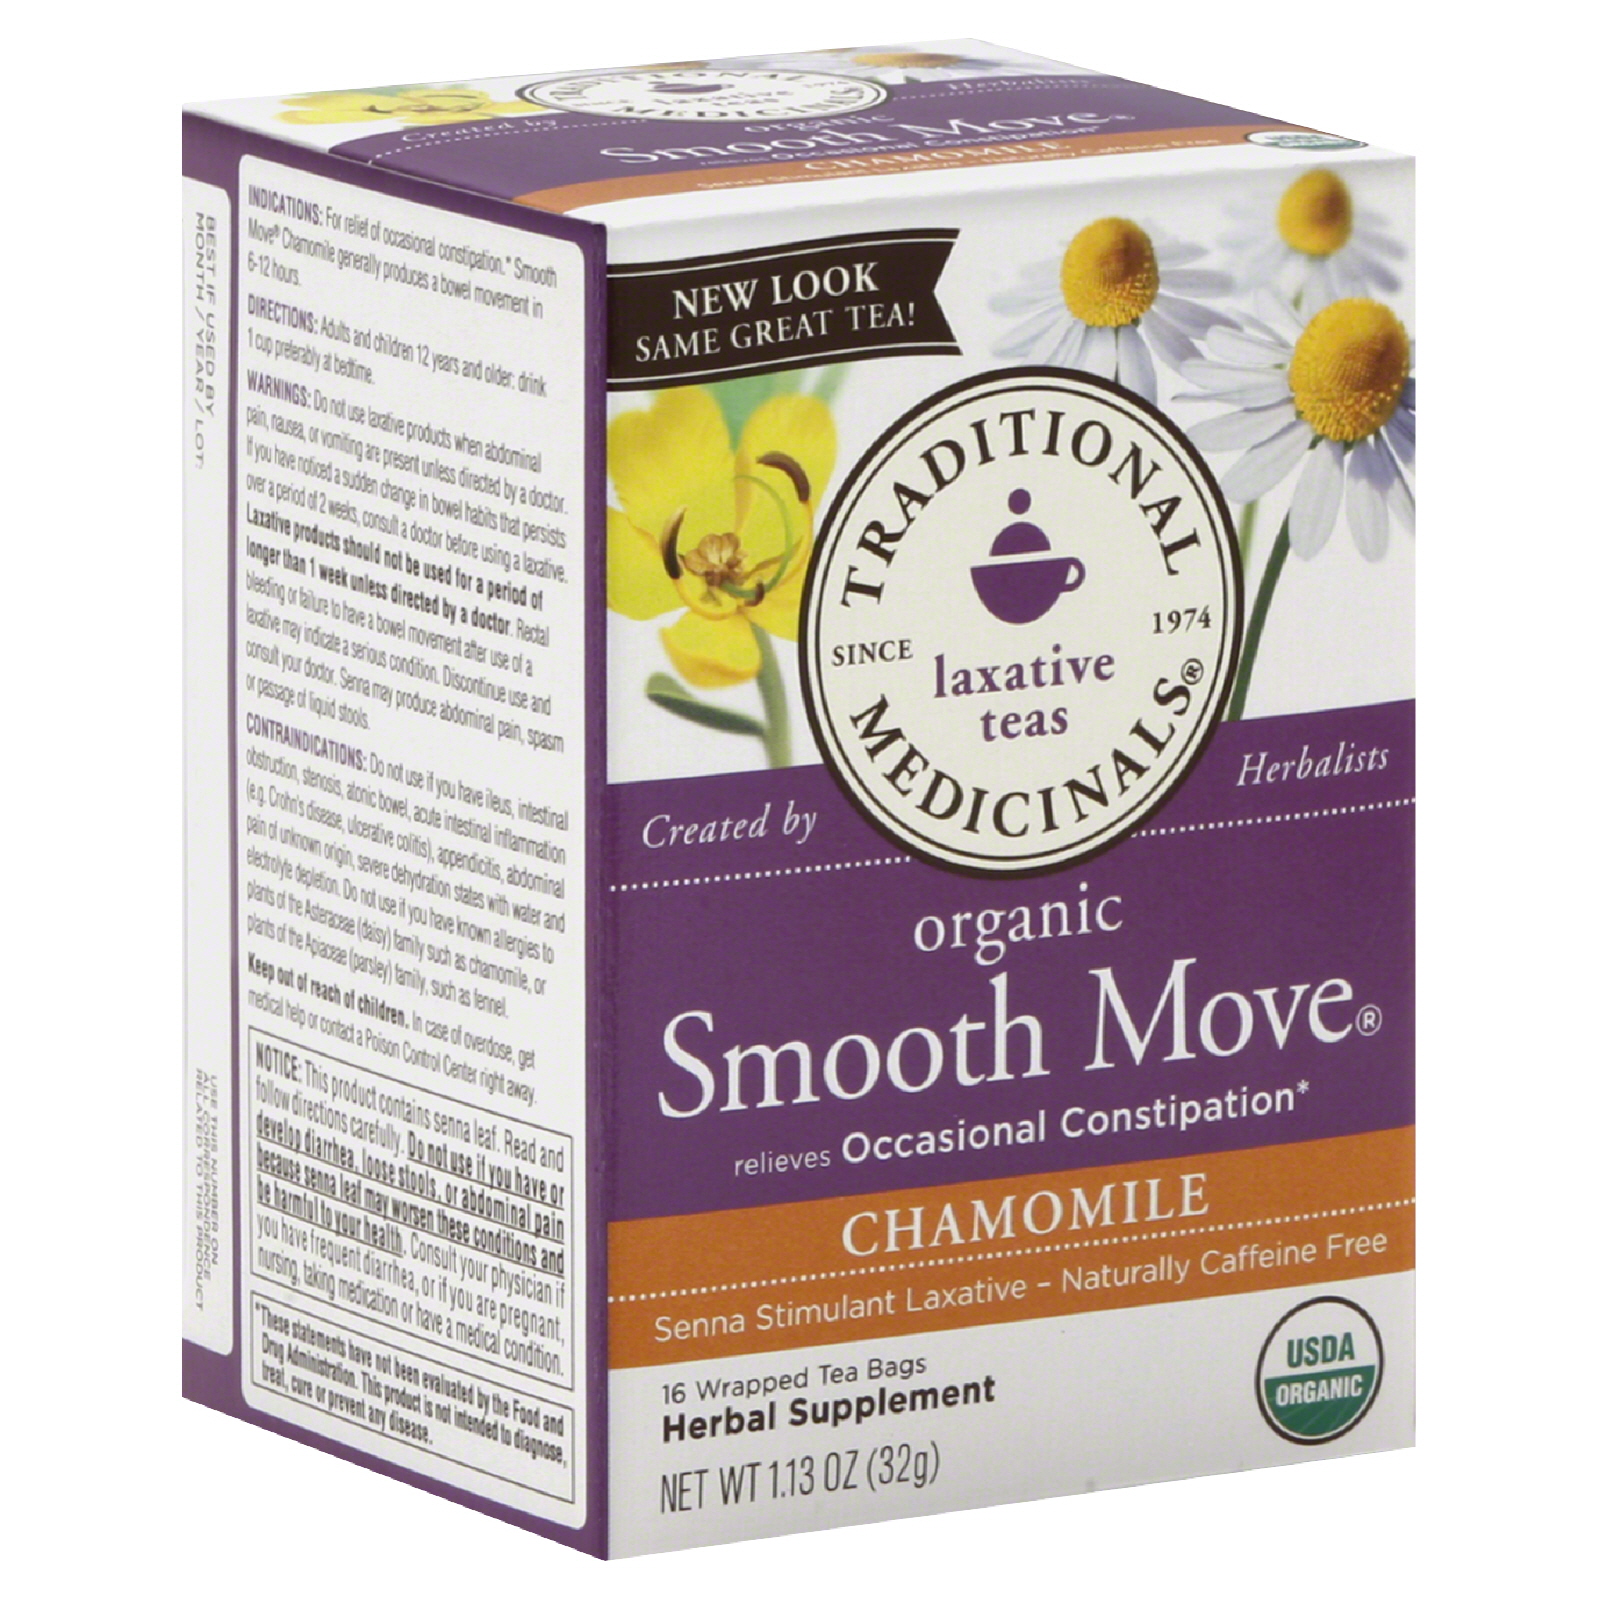 Traditional Medicinals Organic Smooth Move Chamomile Herbal Tea - 16 Tea Bags - Case of 6